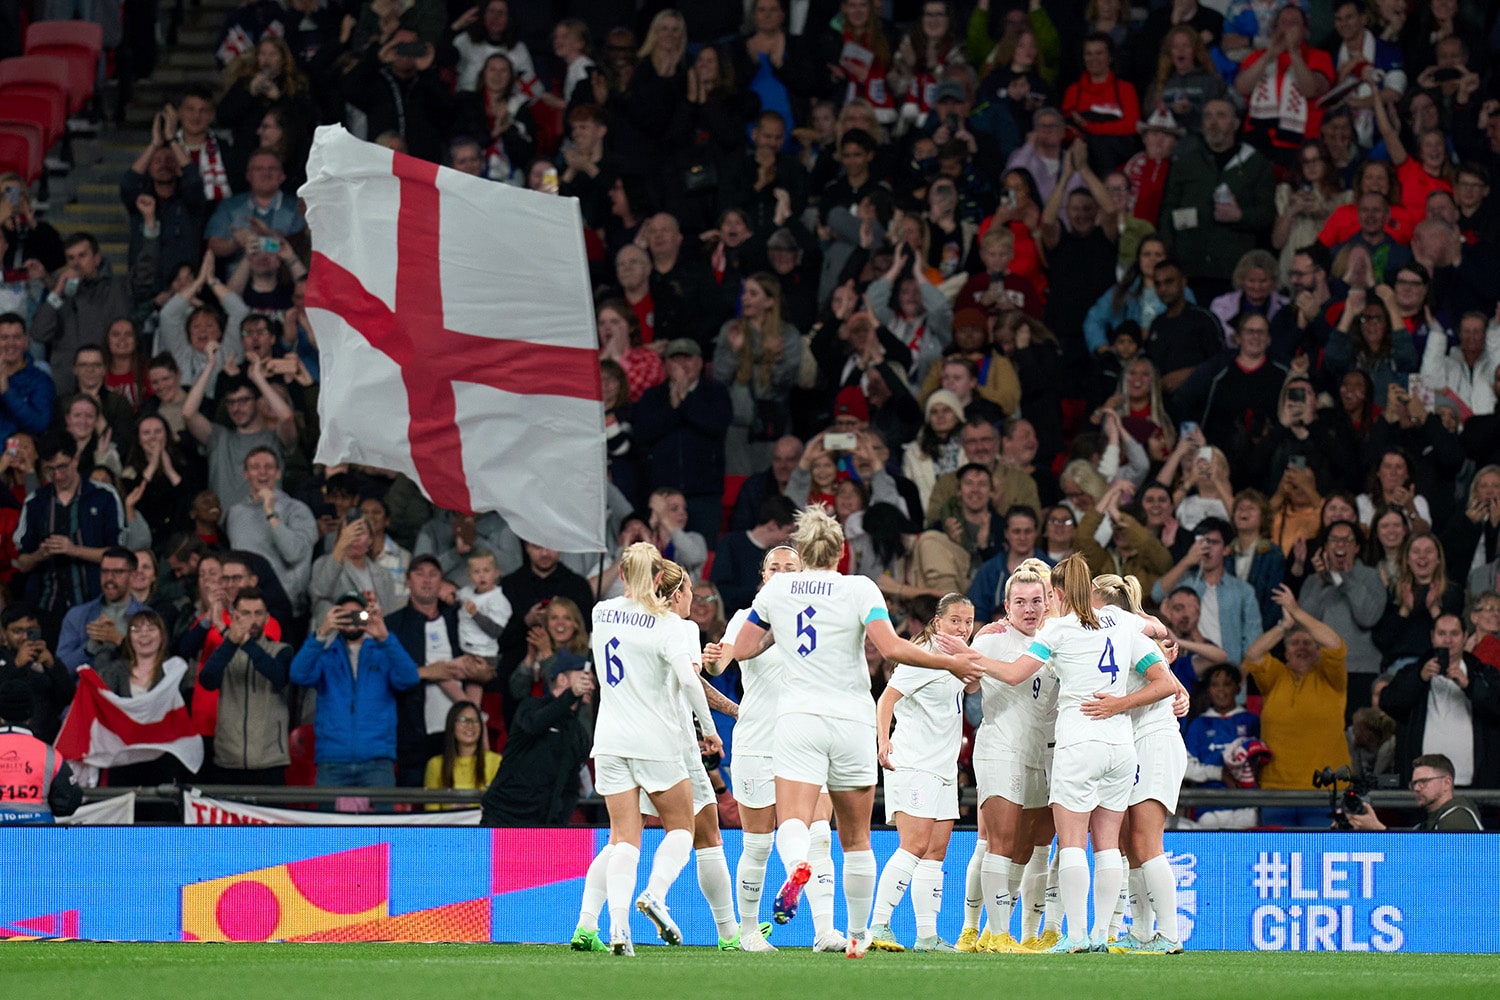 The England Lionesses together during a match at Wembley Stadium.